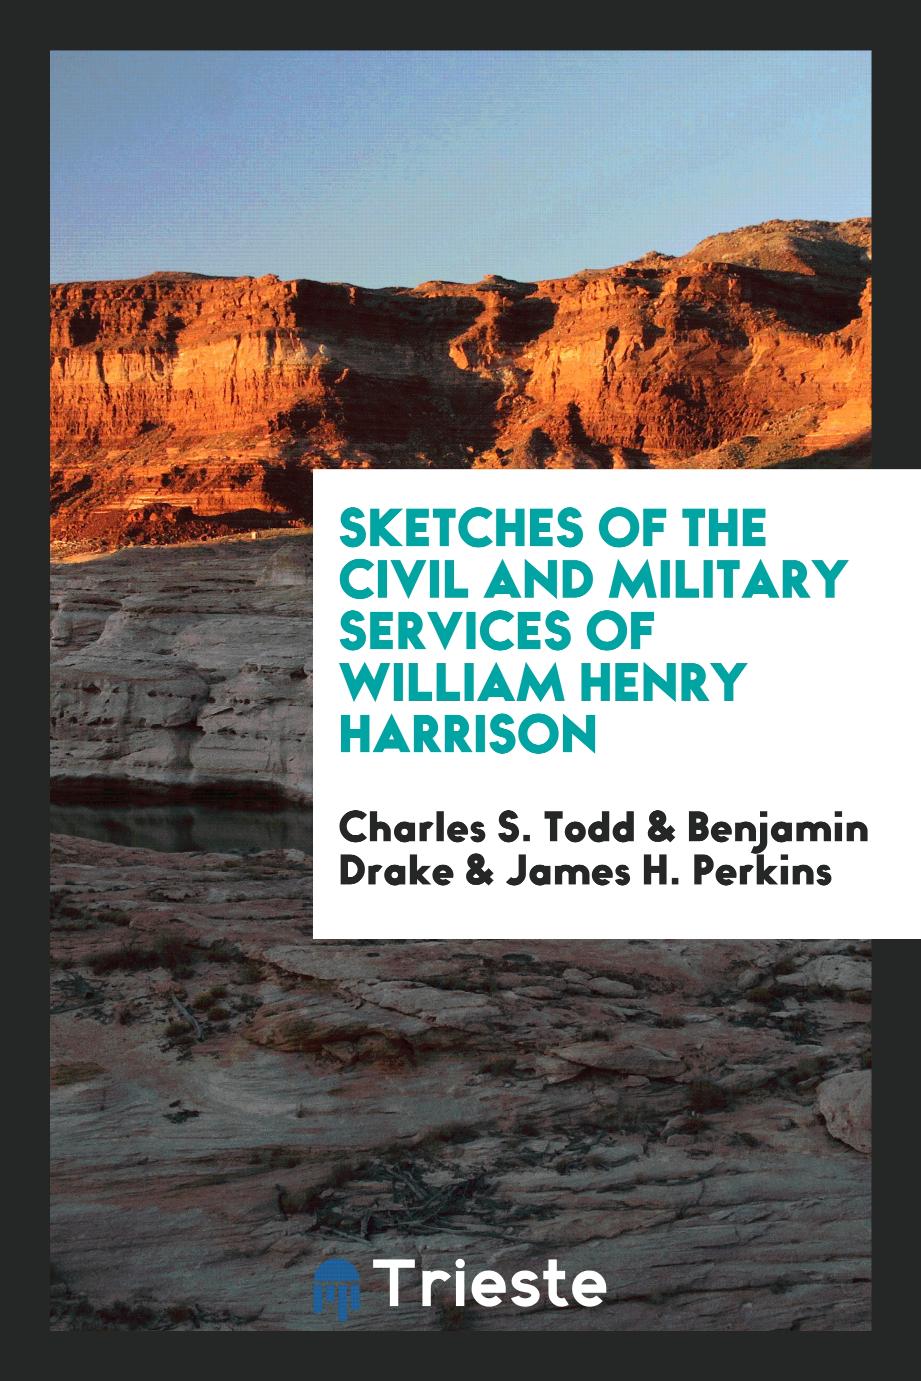 Sketches of the civil and military services of William Henry Harrison